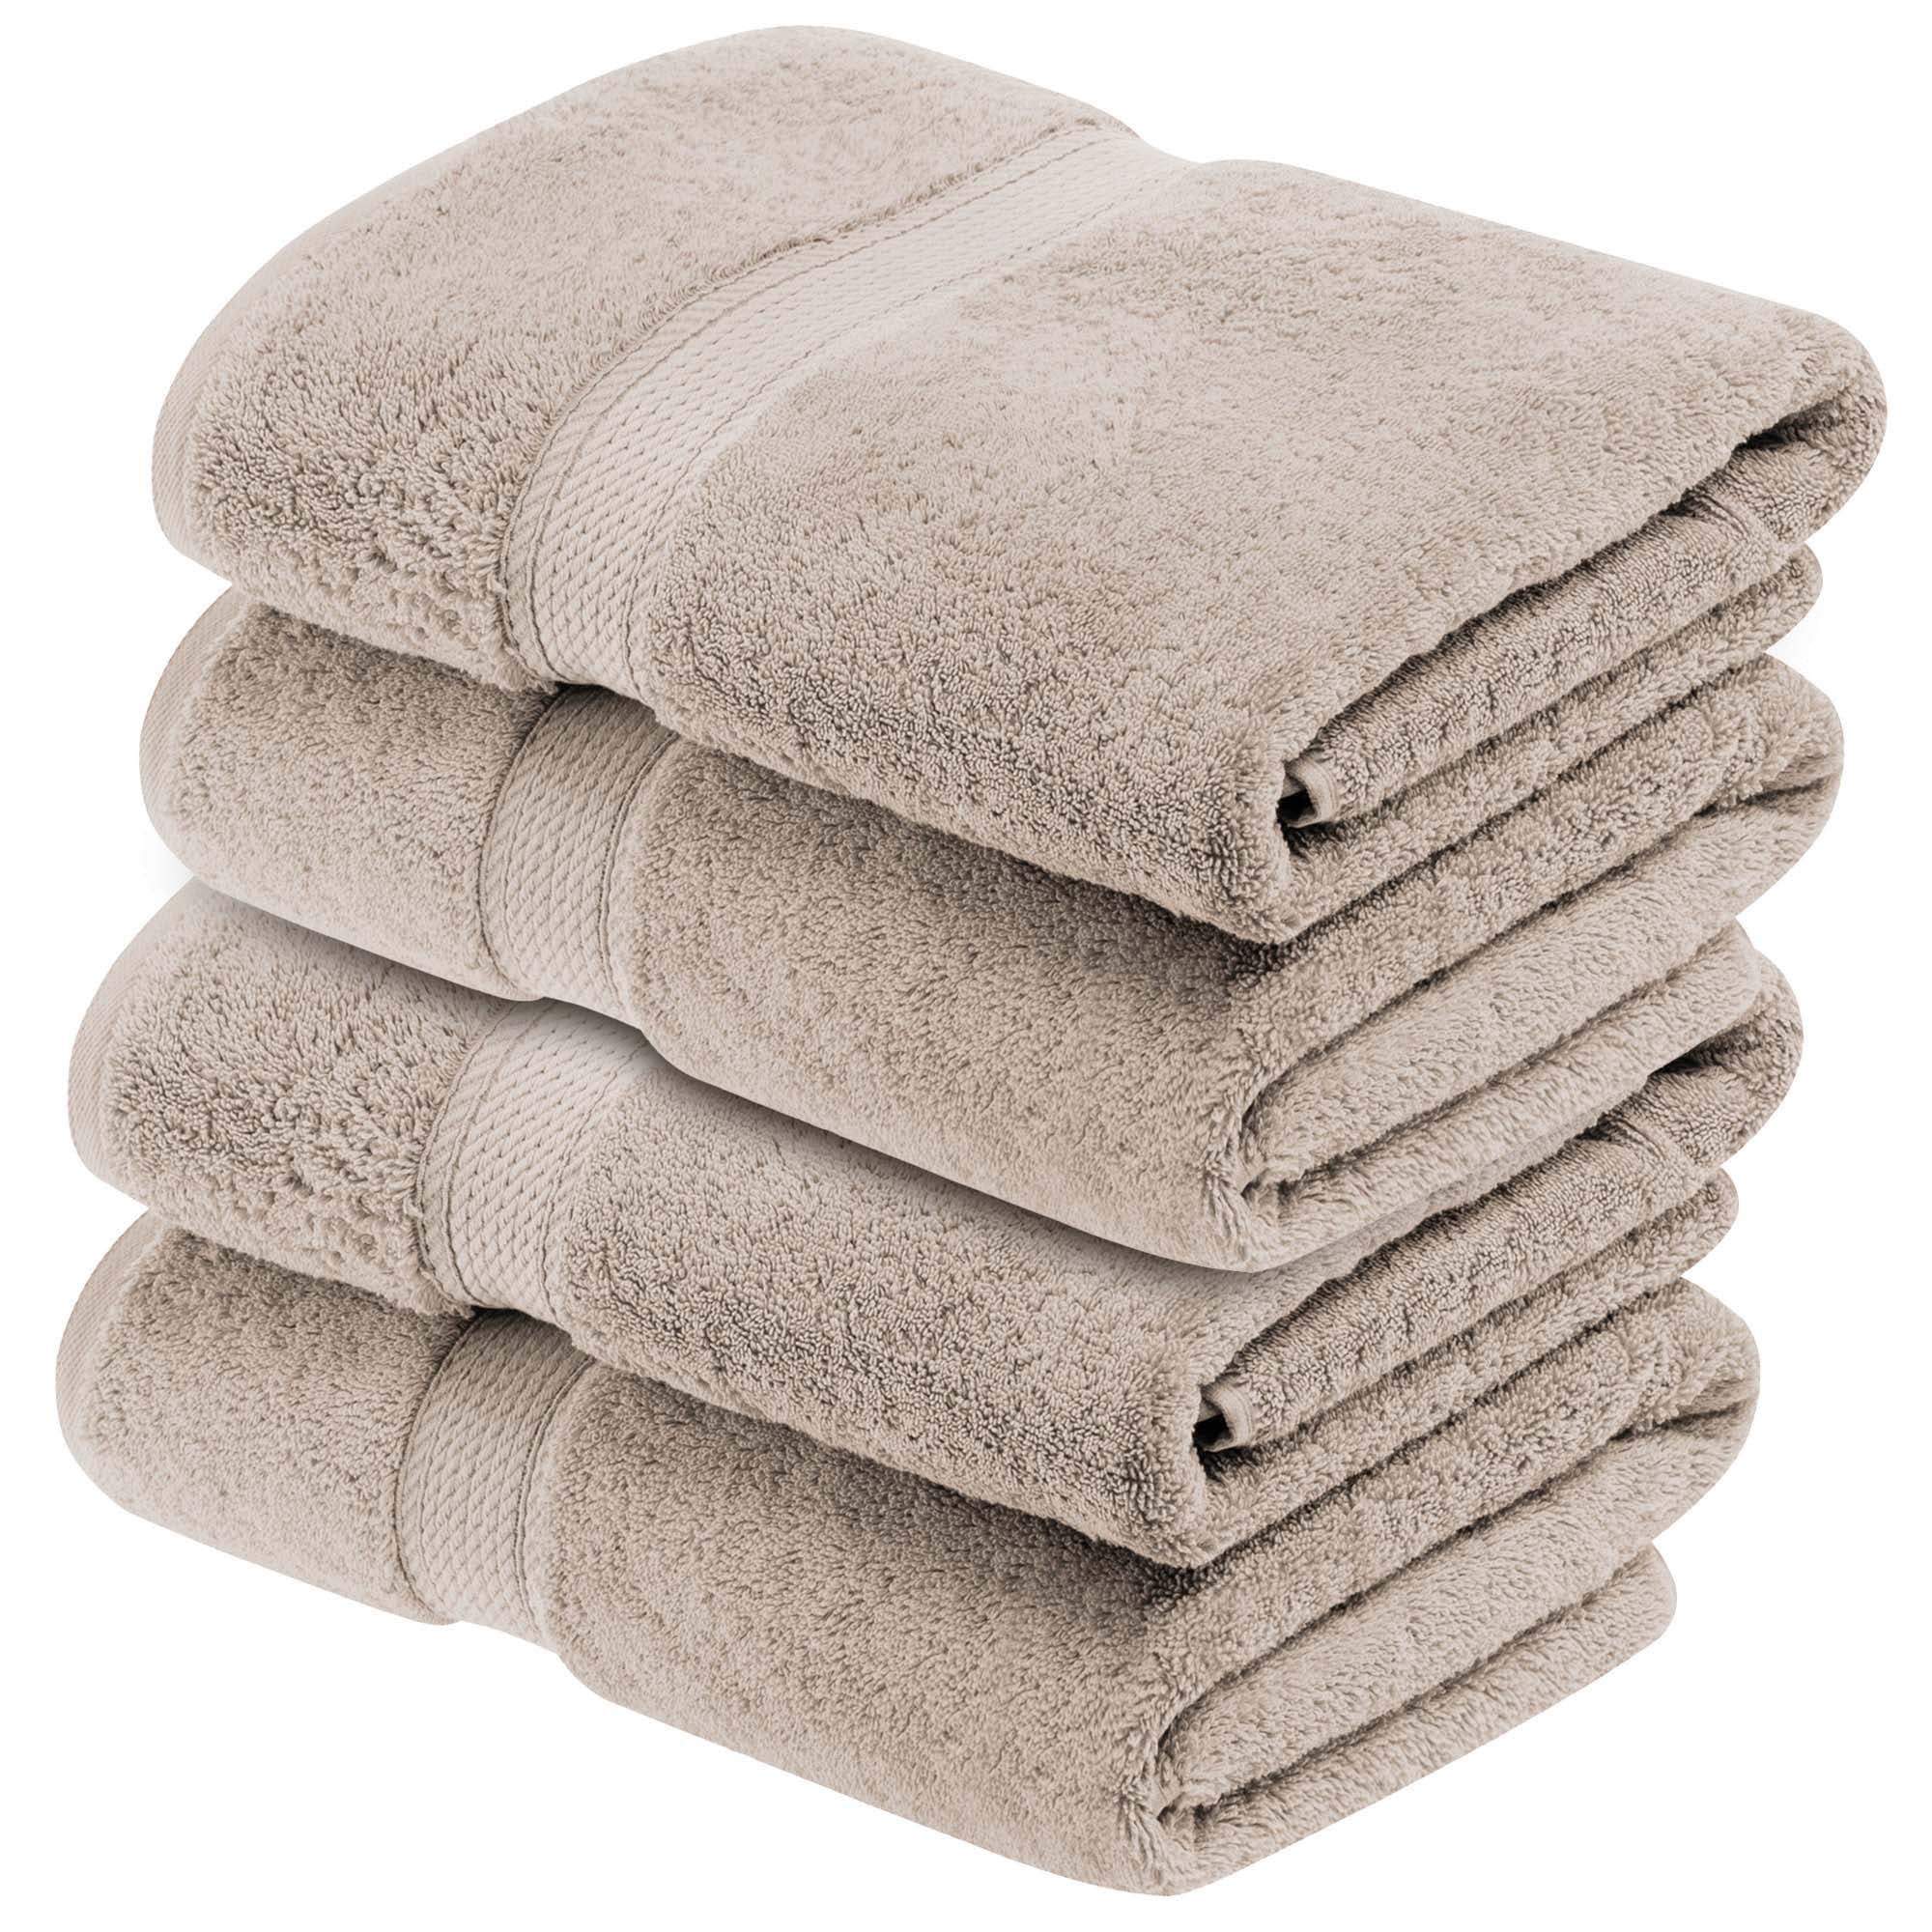 ATEN Homeware Luxury Egyptian Cotton Bath Towels Extra Large - 500 GSM 3  Pieces of 26x54 Inches Bath Sheets - Highly Absorbent and Quick Dry Towel  Set